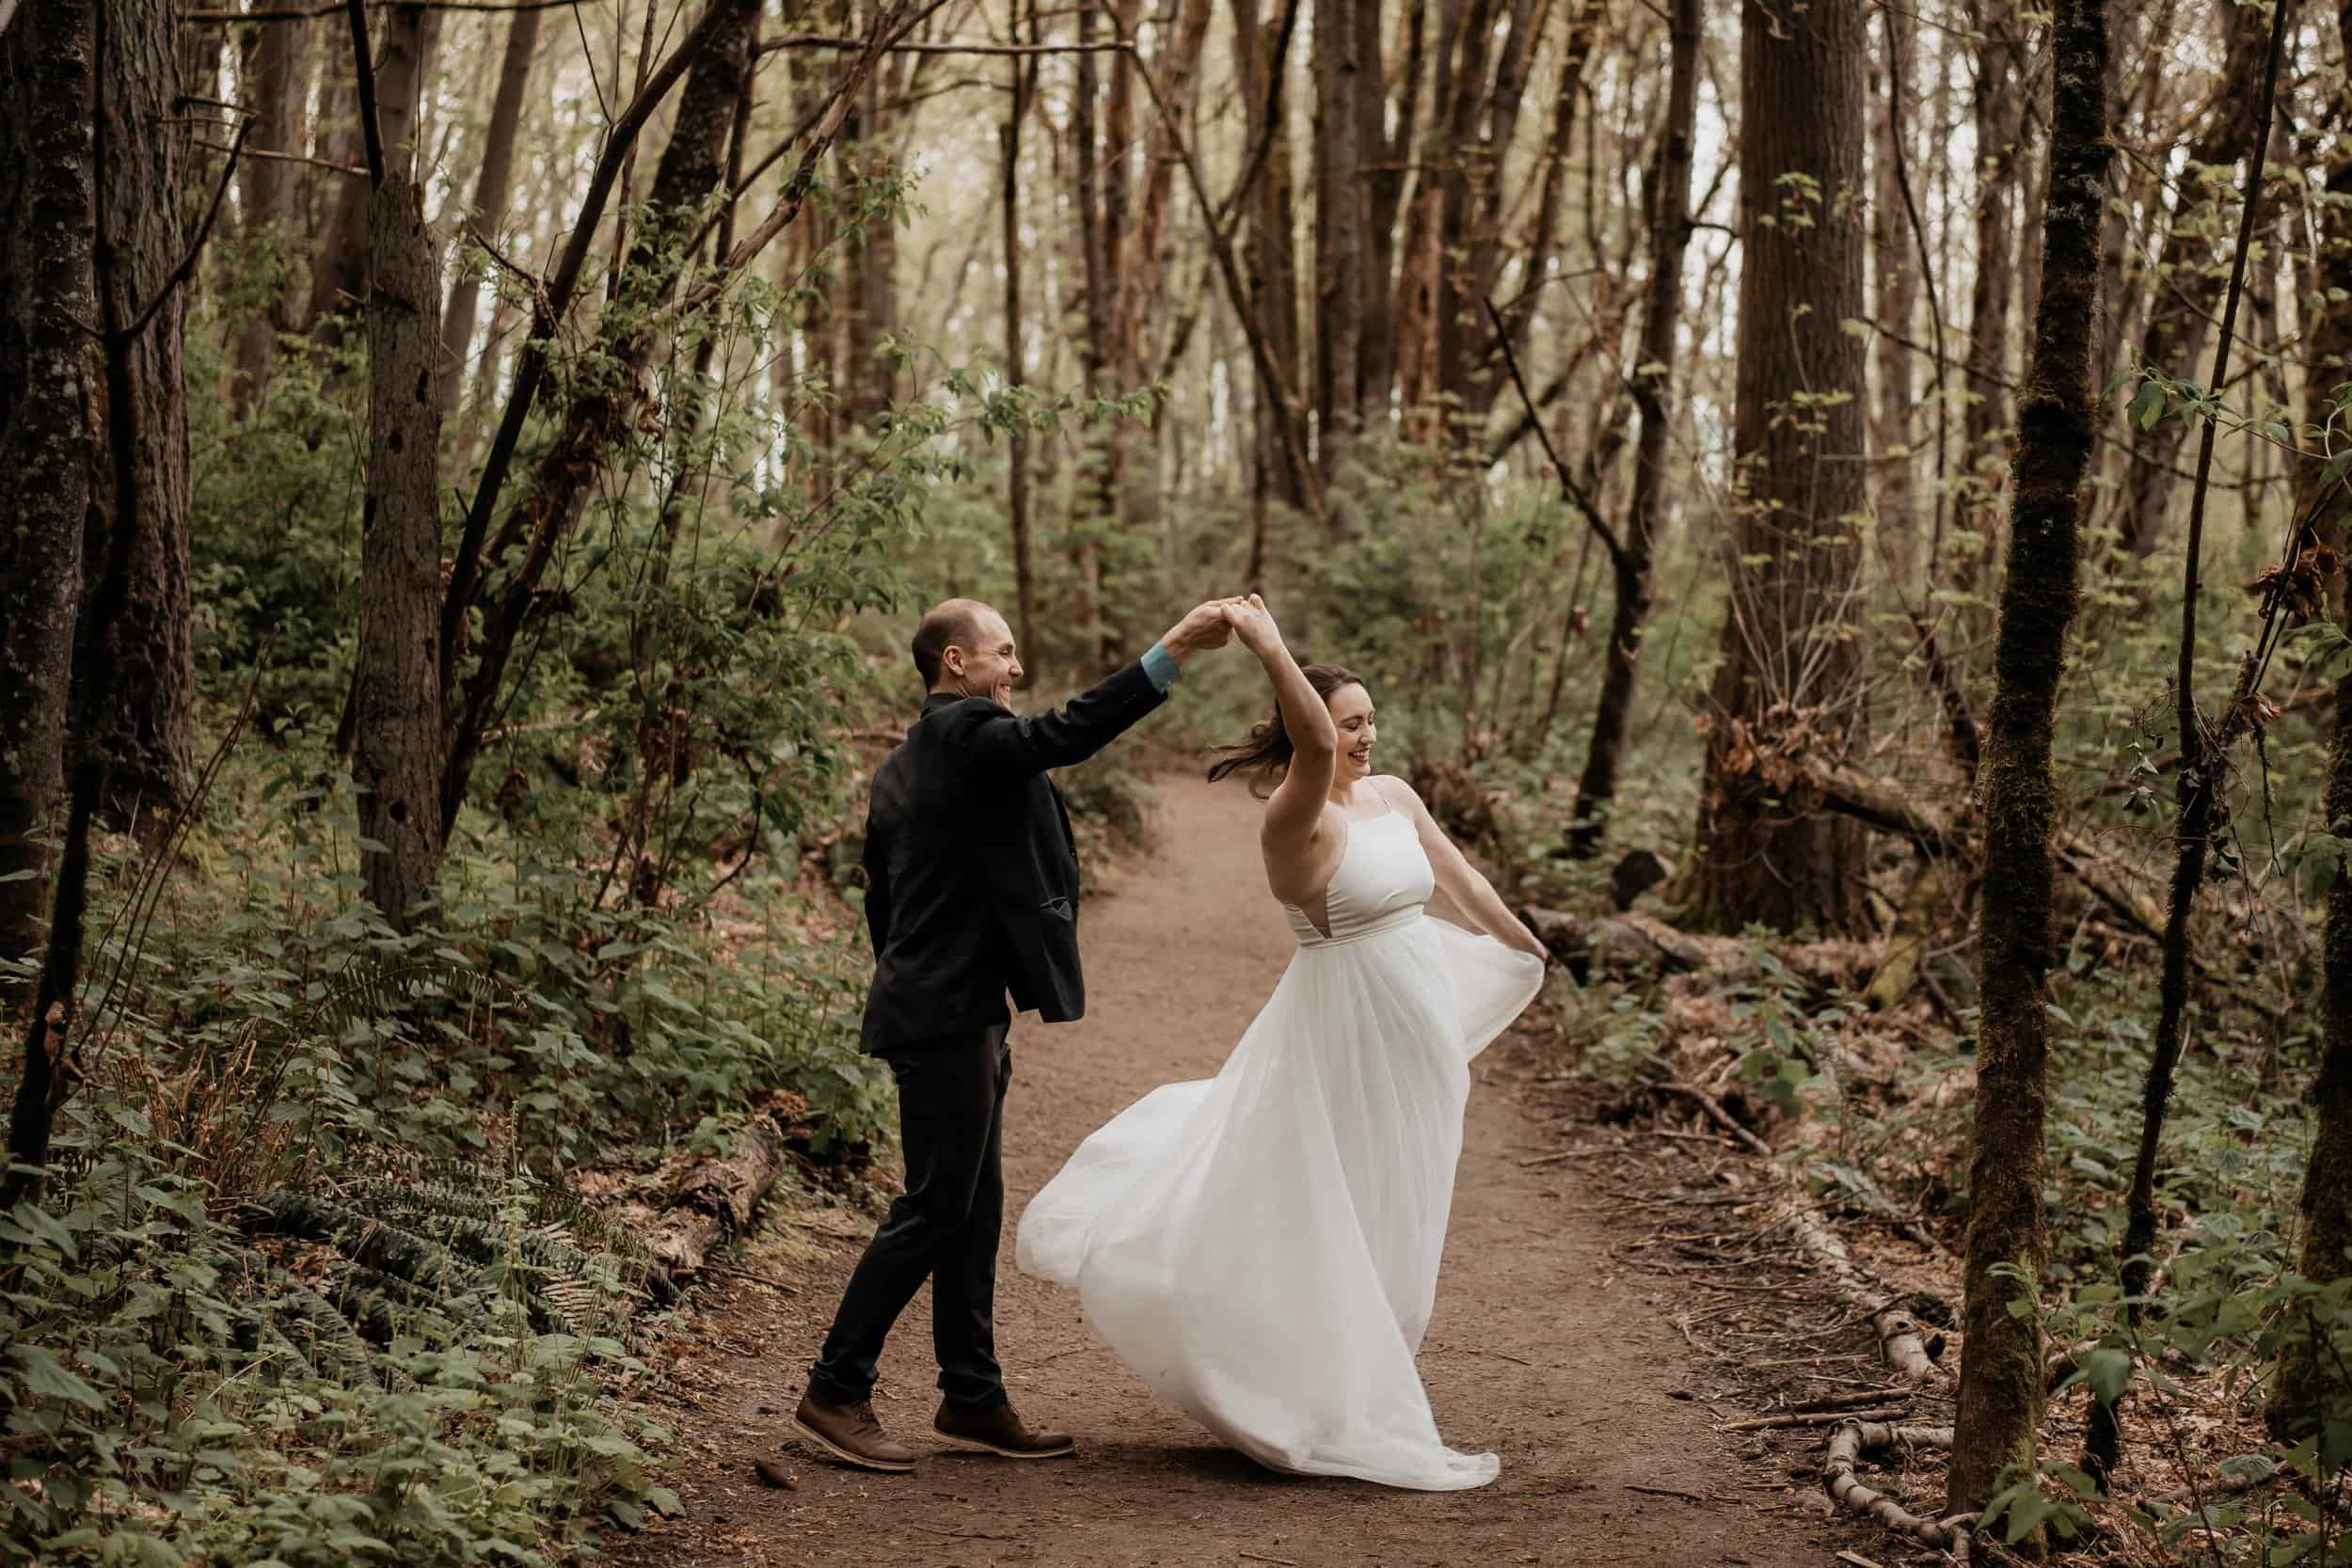 Forest-friendly wedding attire and accessories